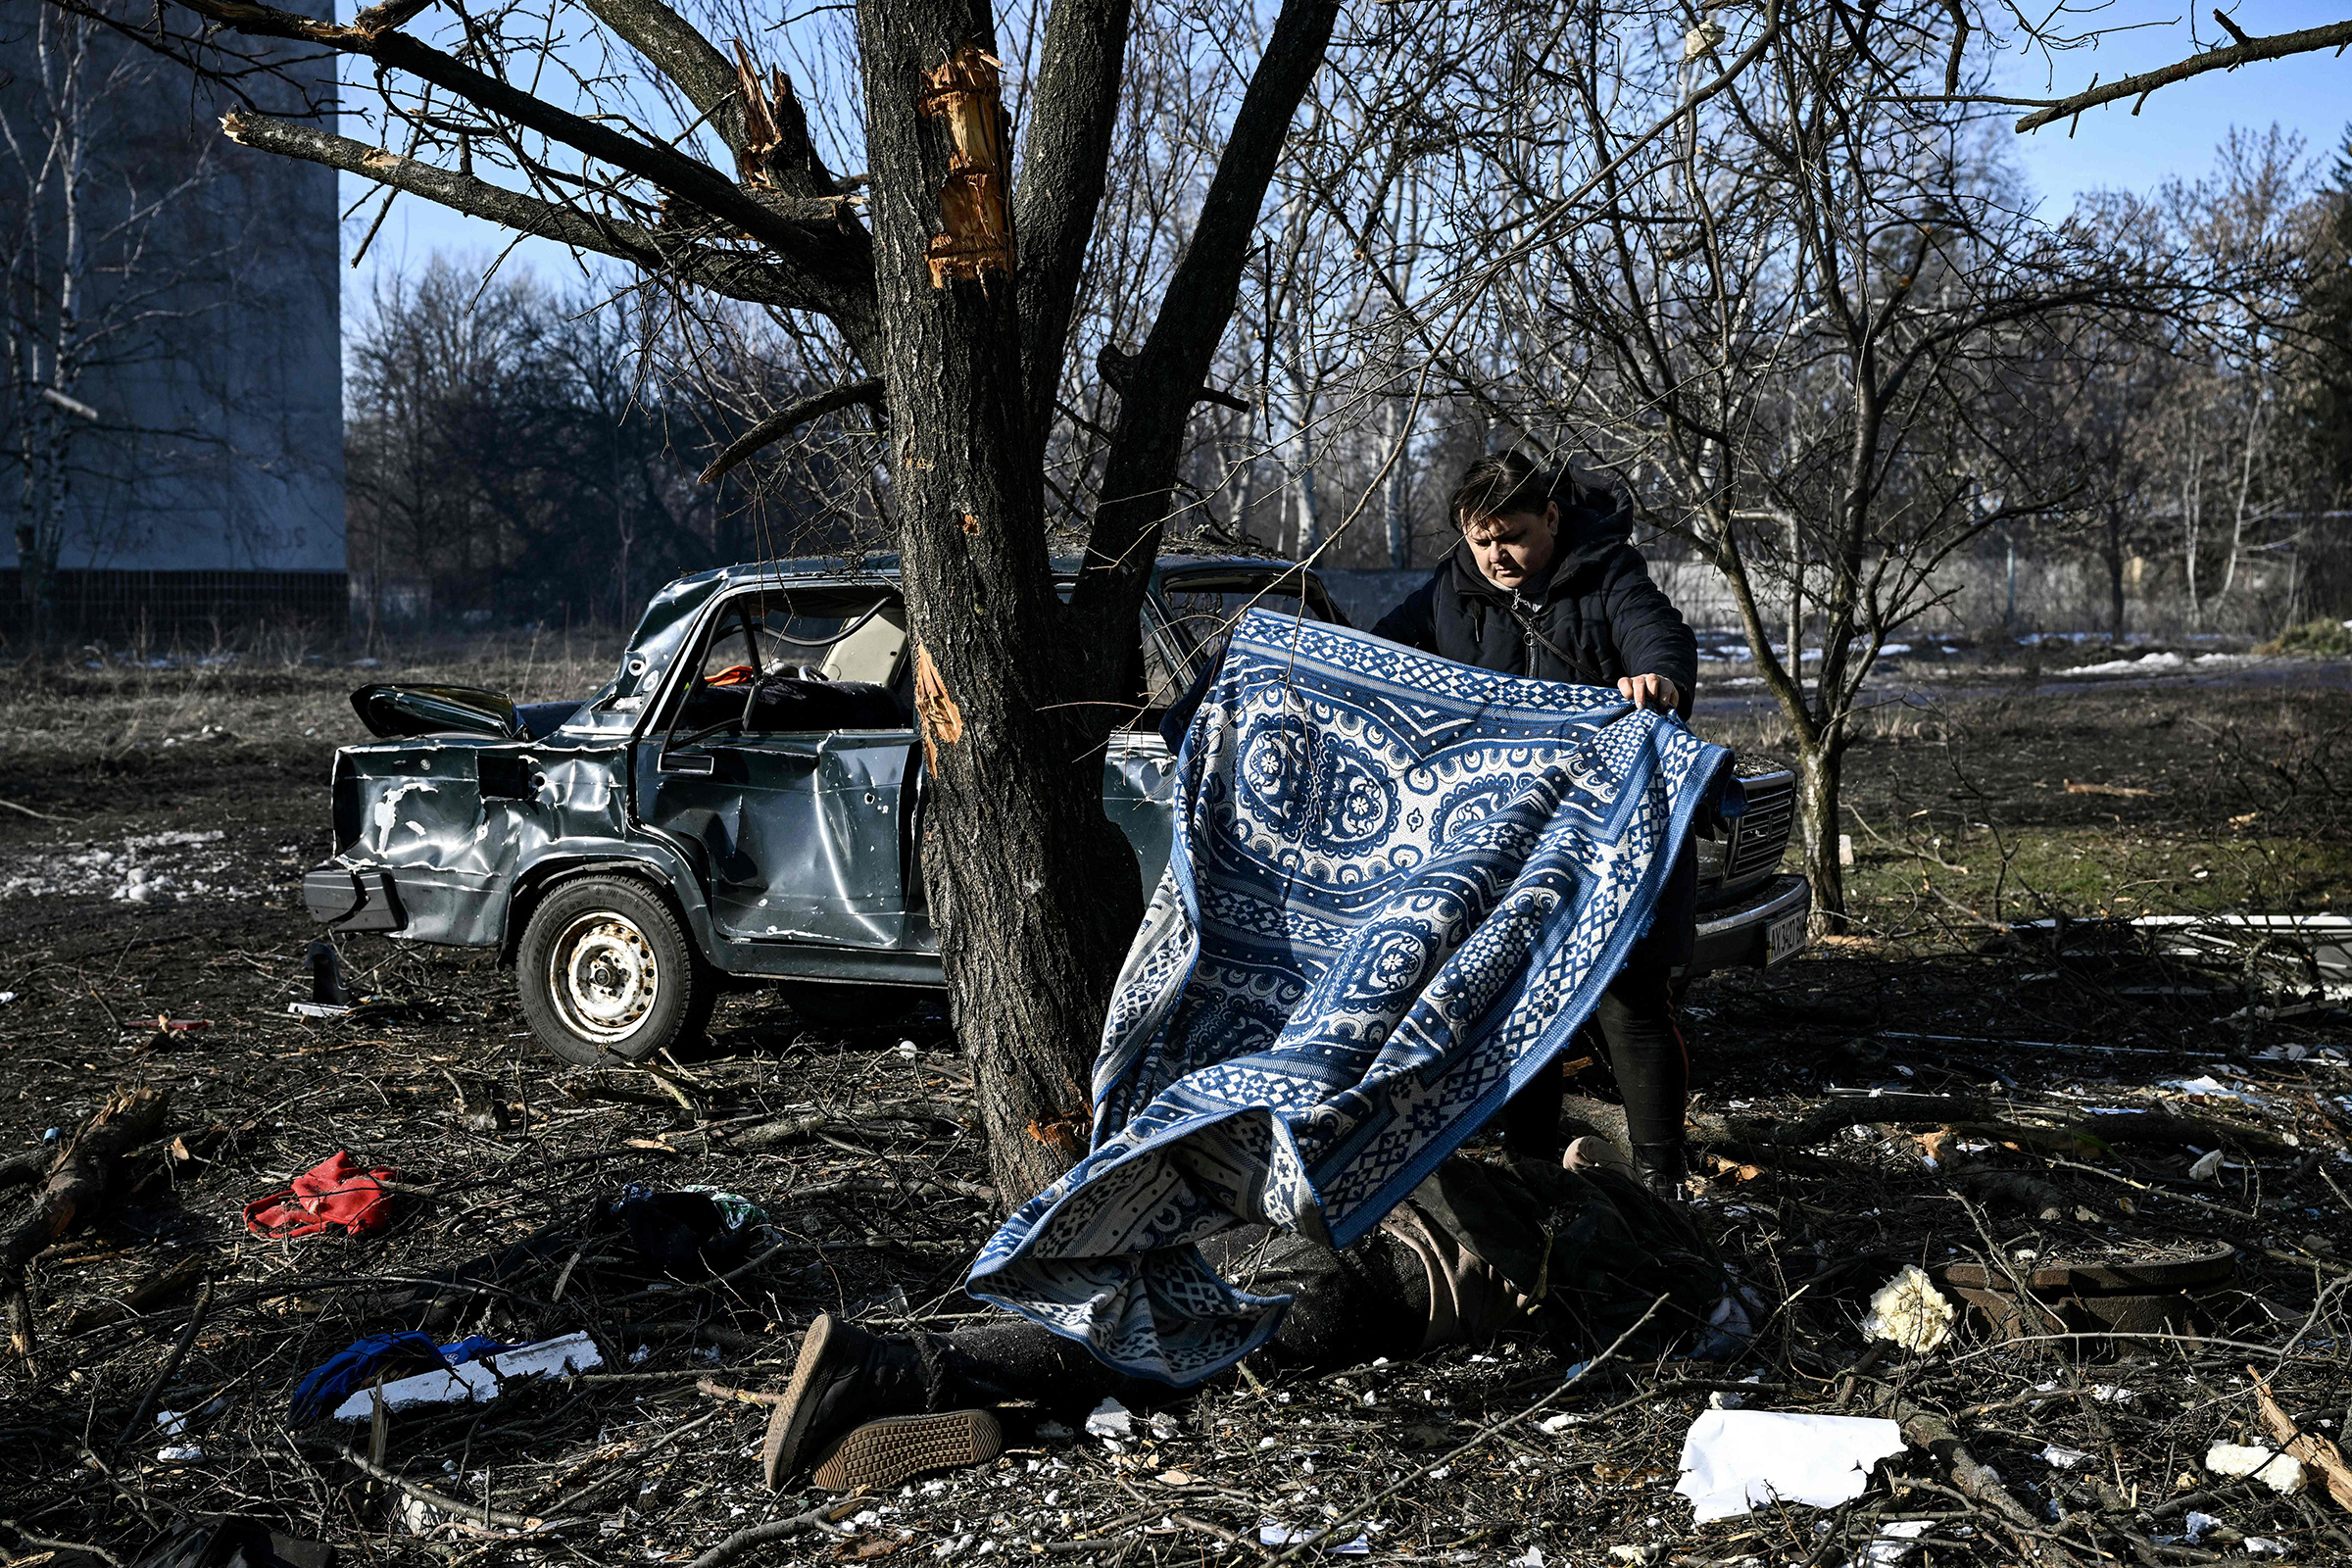 A man uses a carpet to cover a body on the ground after bombings on the eastern Ukraine town of Chuhuiv on Feb. 24. (Aris Messinis—AFP/Getty Images)